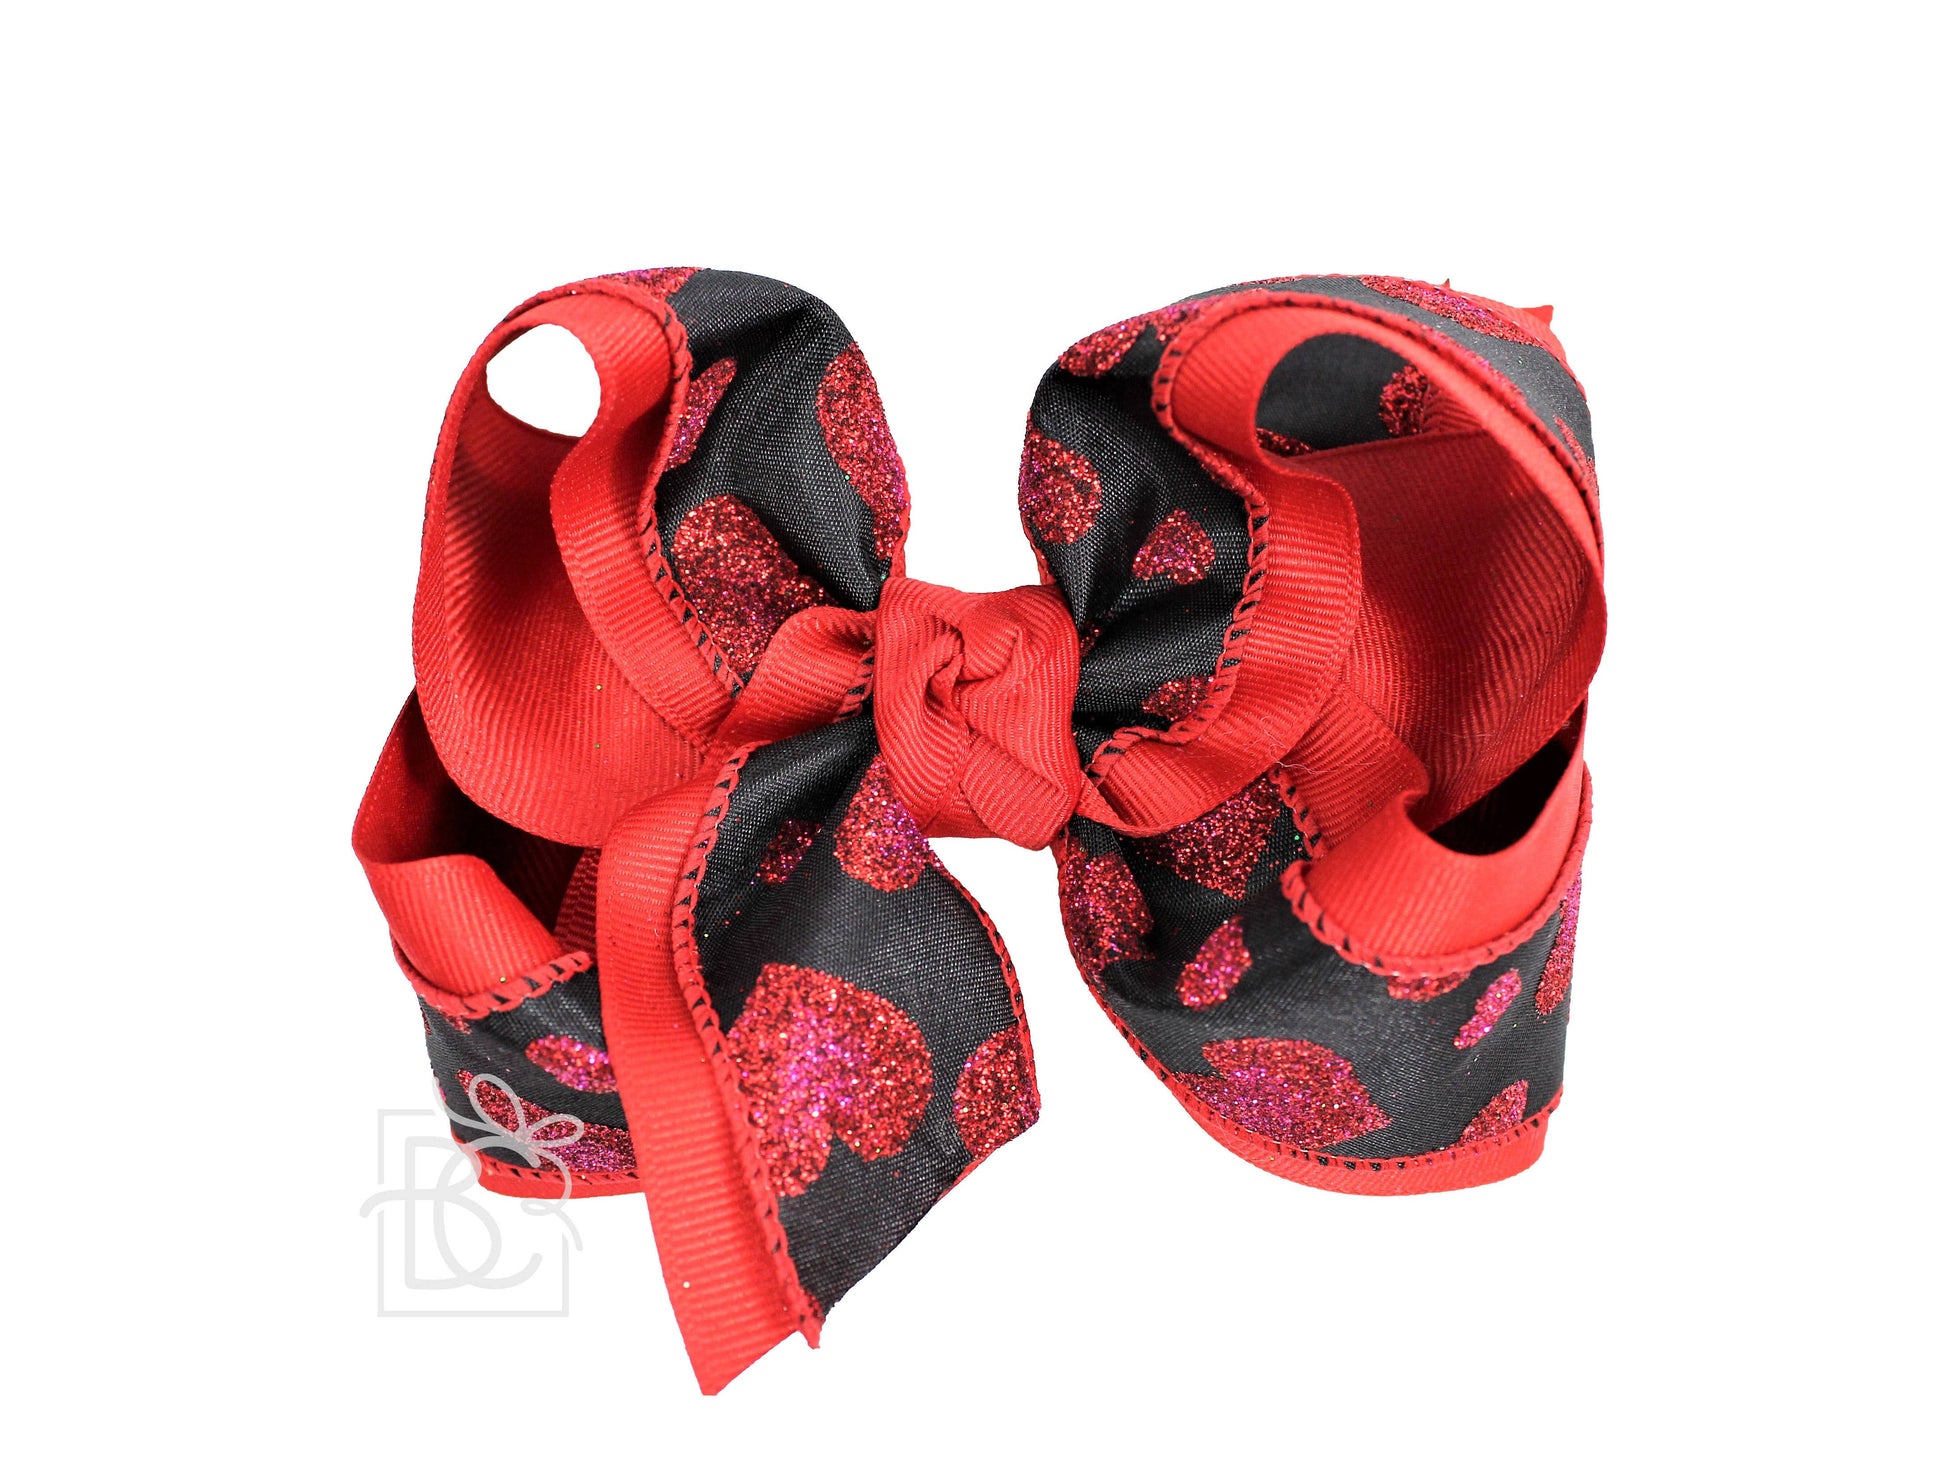 Large Glitter Heart Bow in Red  - Doodlebug's Children's Boutique